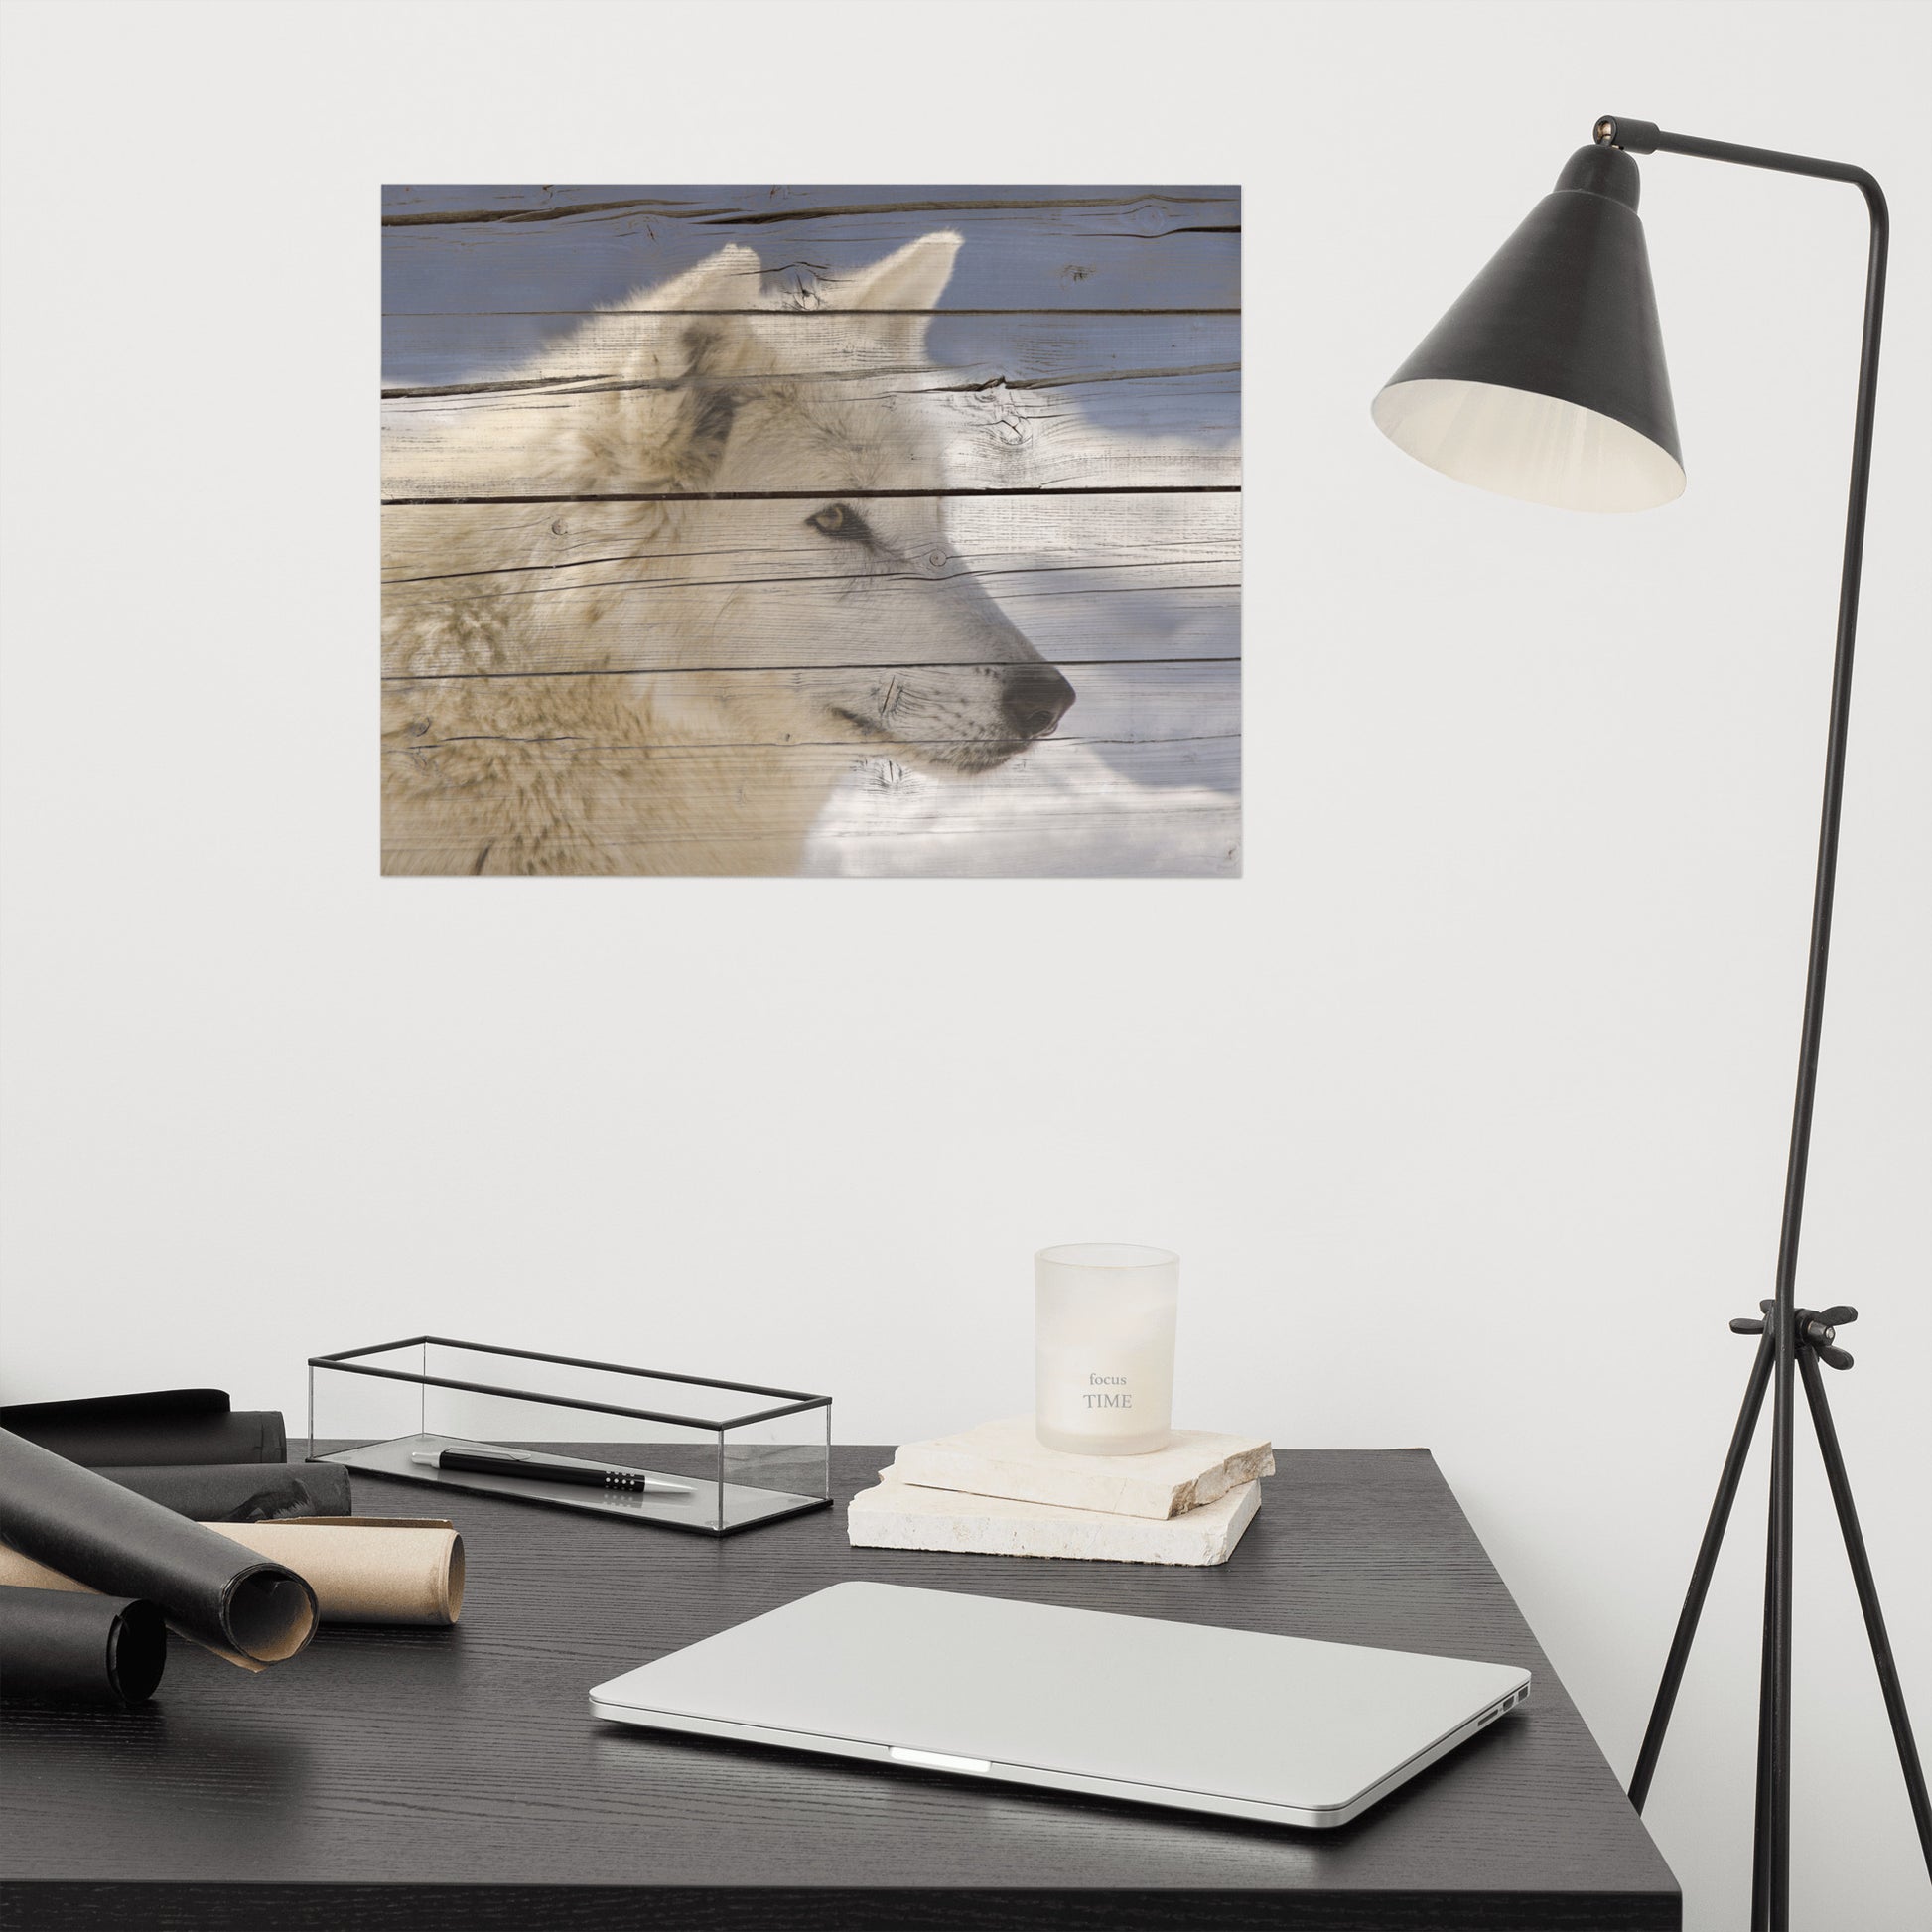 Rustic Office Wall Decor: Aries the White Wolf Portrait on Faux Weathered Wood Texture - Farmhouse / Country Style / Modern Wildlife / Animal Photographic Artwork